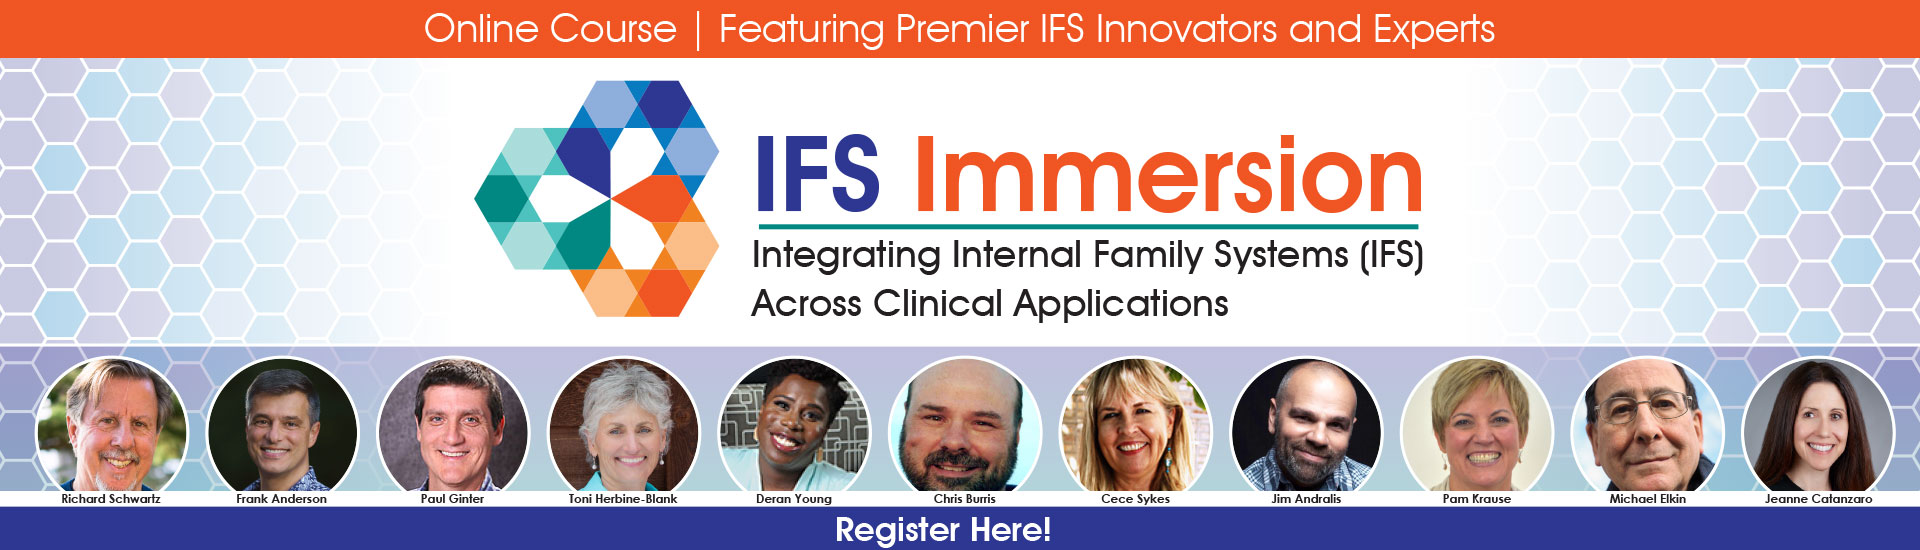 IFS Immersion Live Online Course